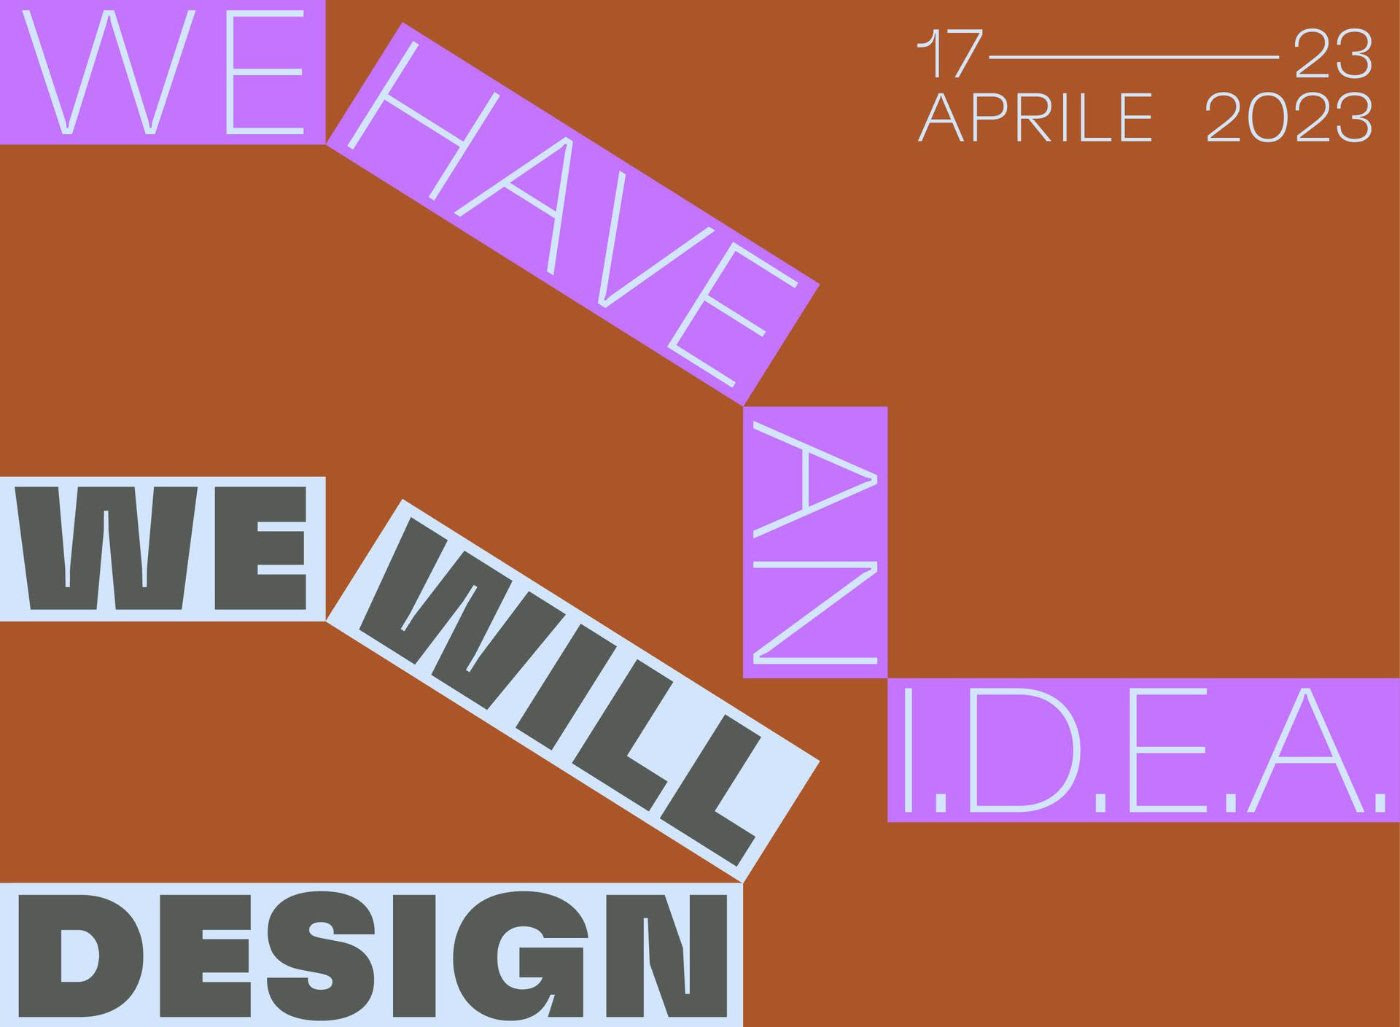 We Will Design: We have an I.D.E.A.